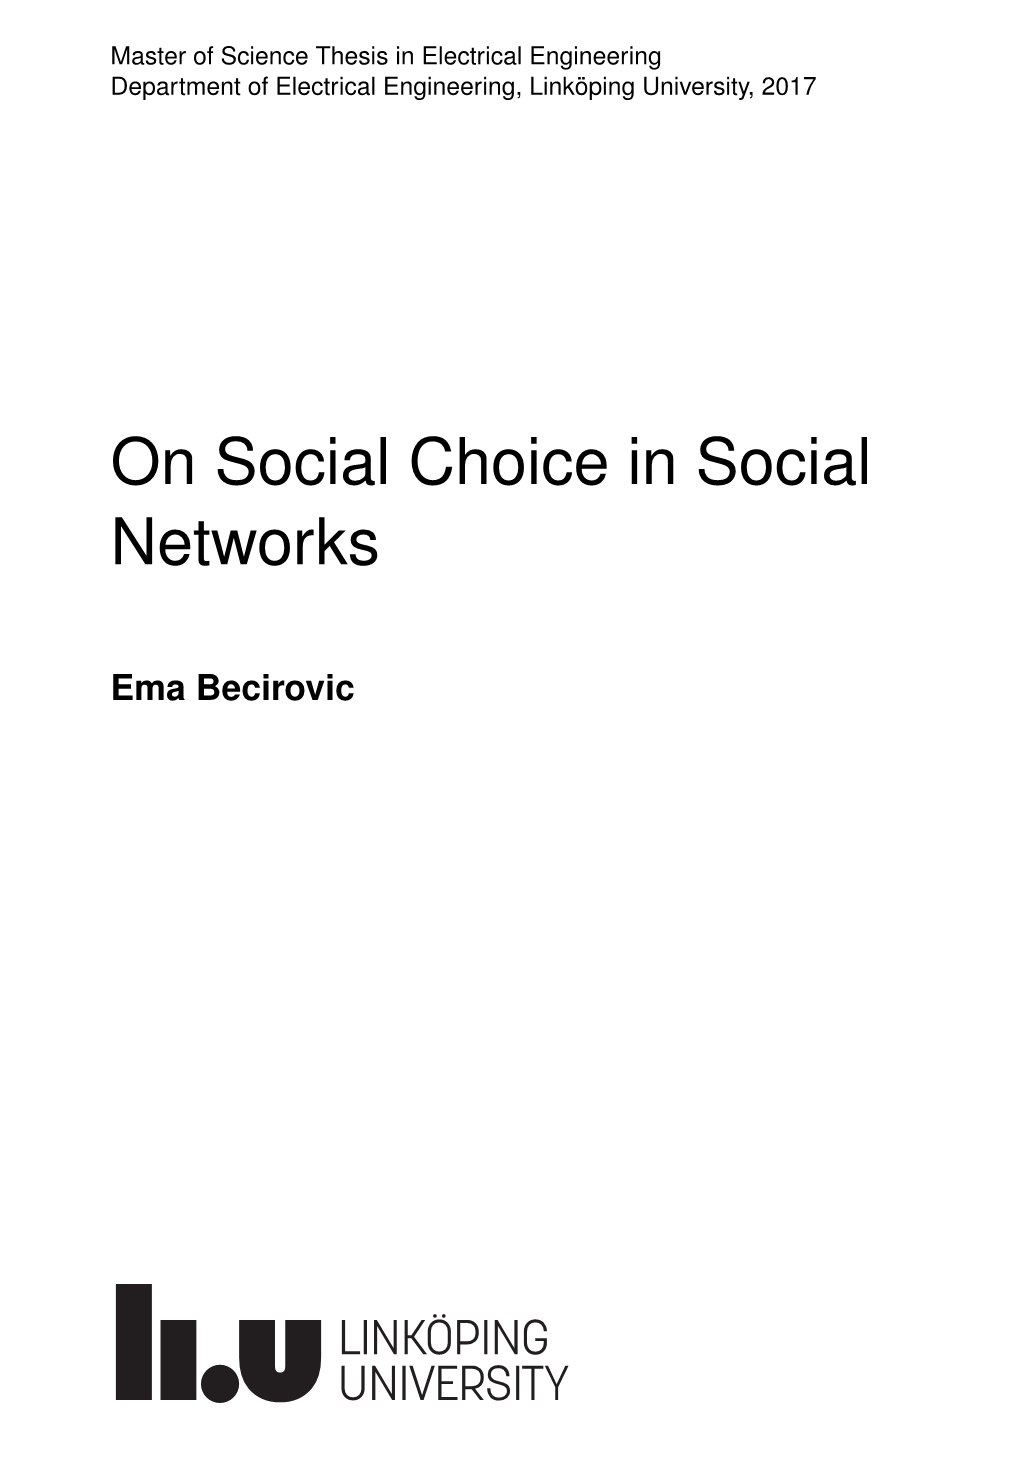 On Social Choice in Social Networks